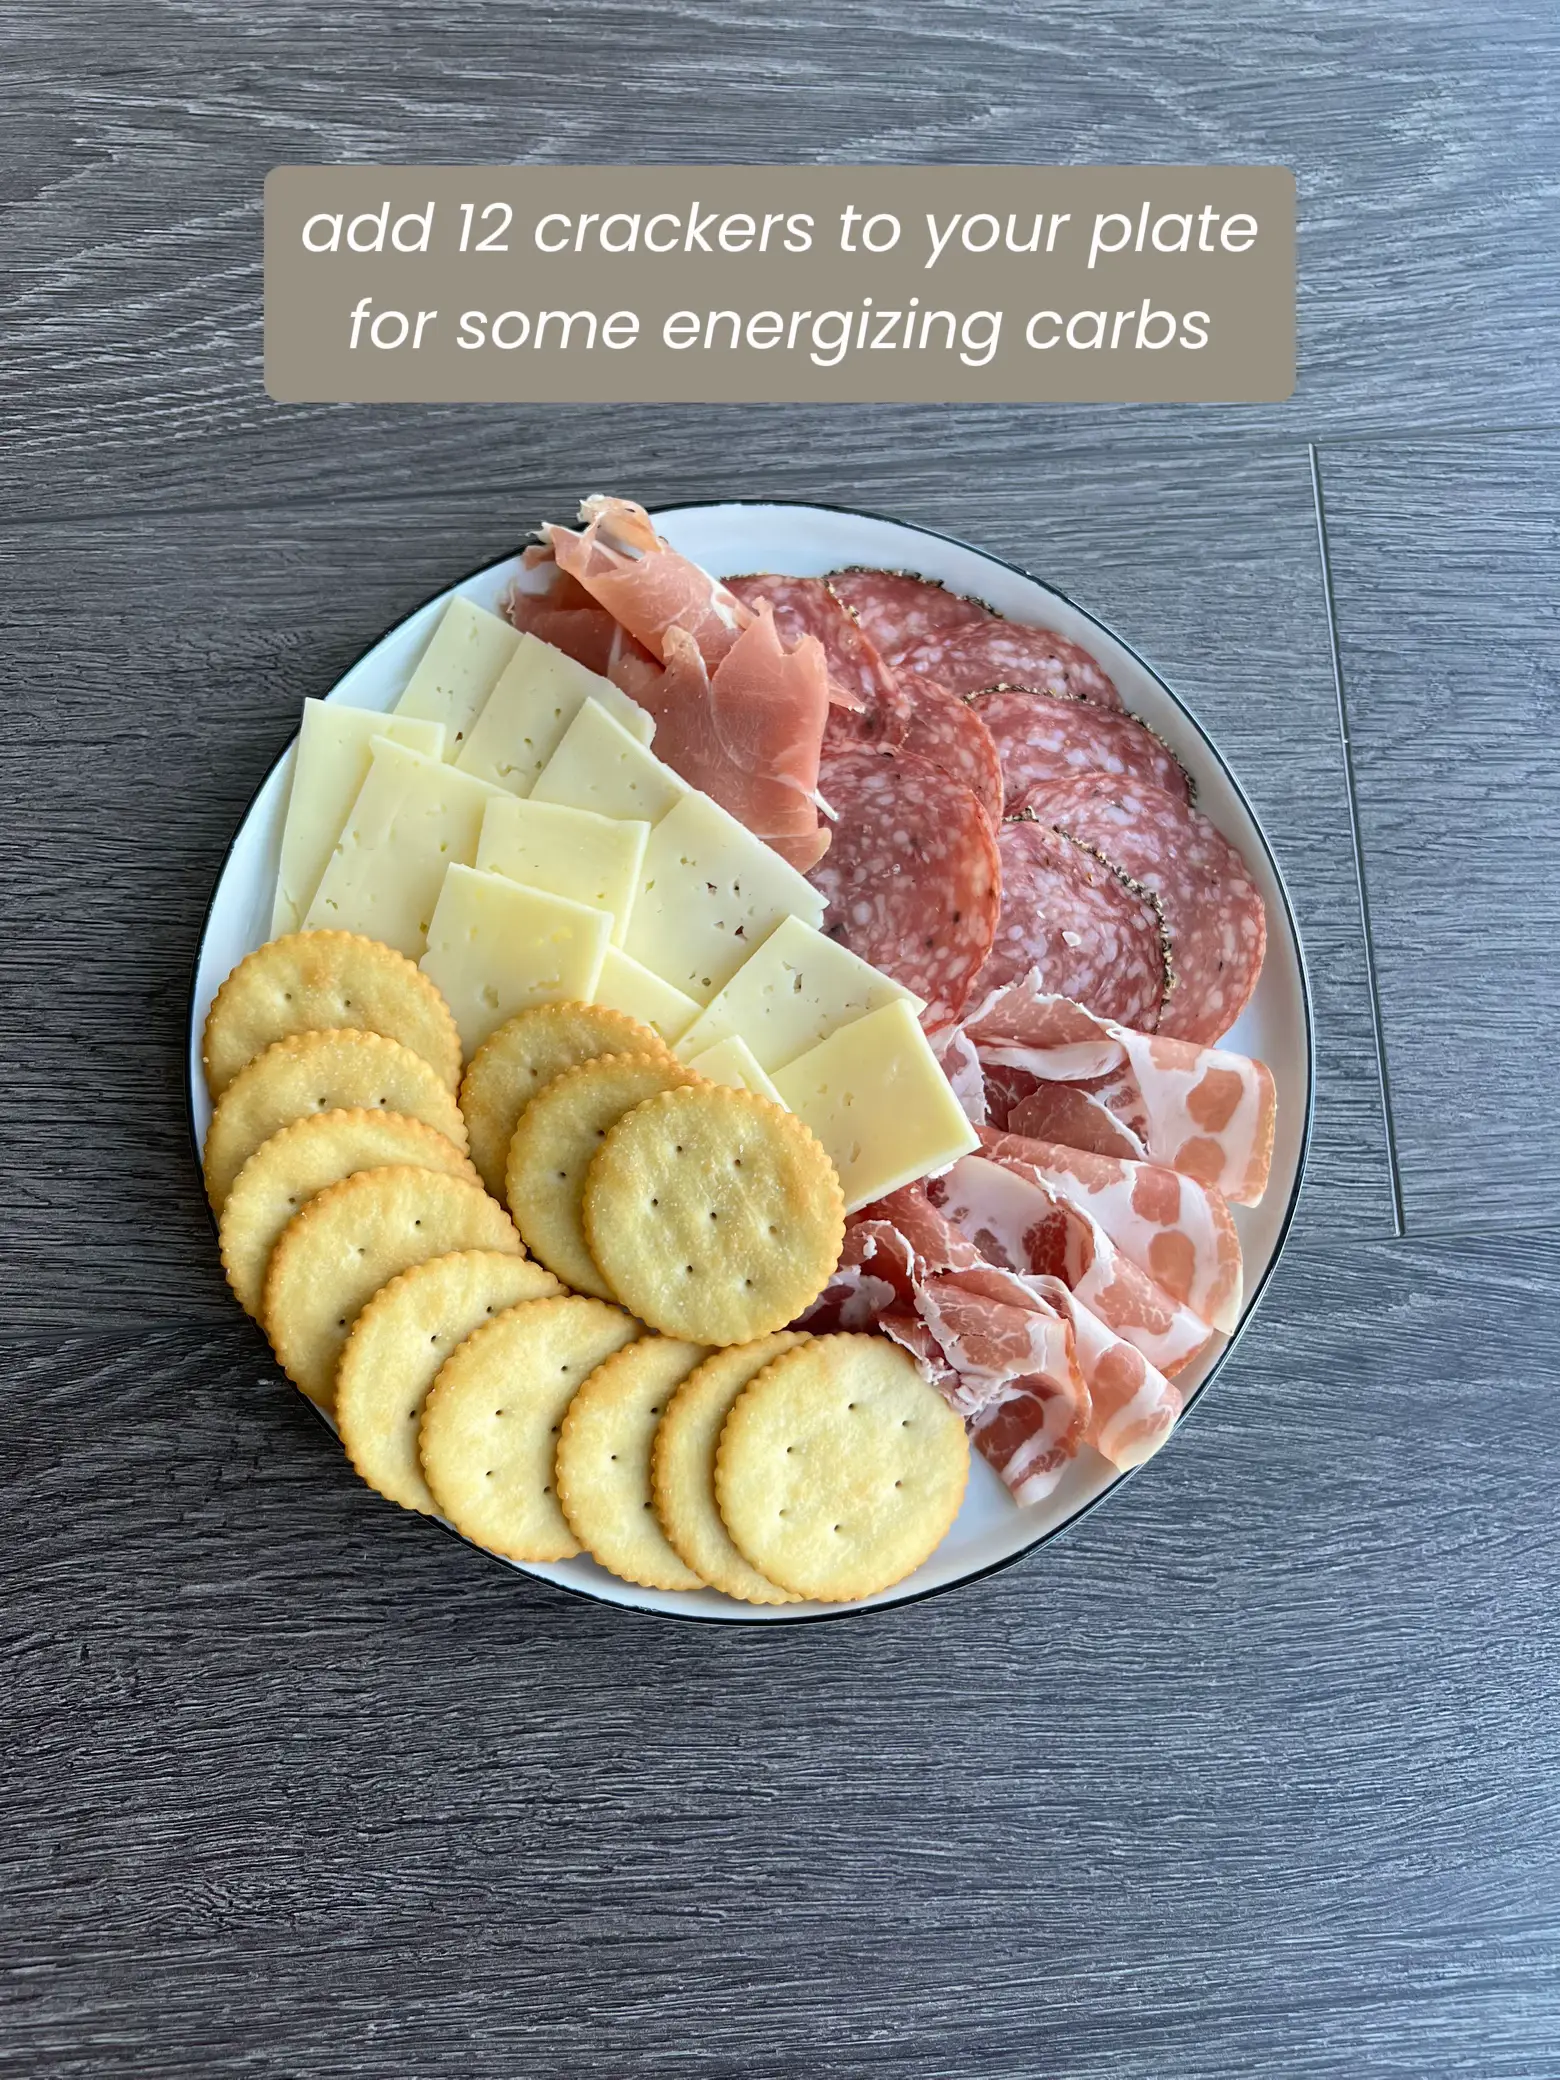 How to Turn Cheese and Crackers into DIY Adult Lunchables